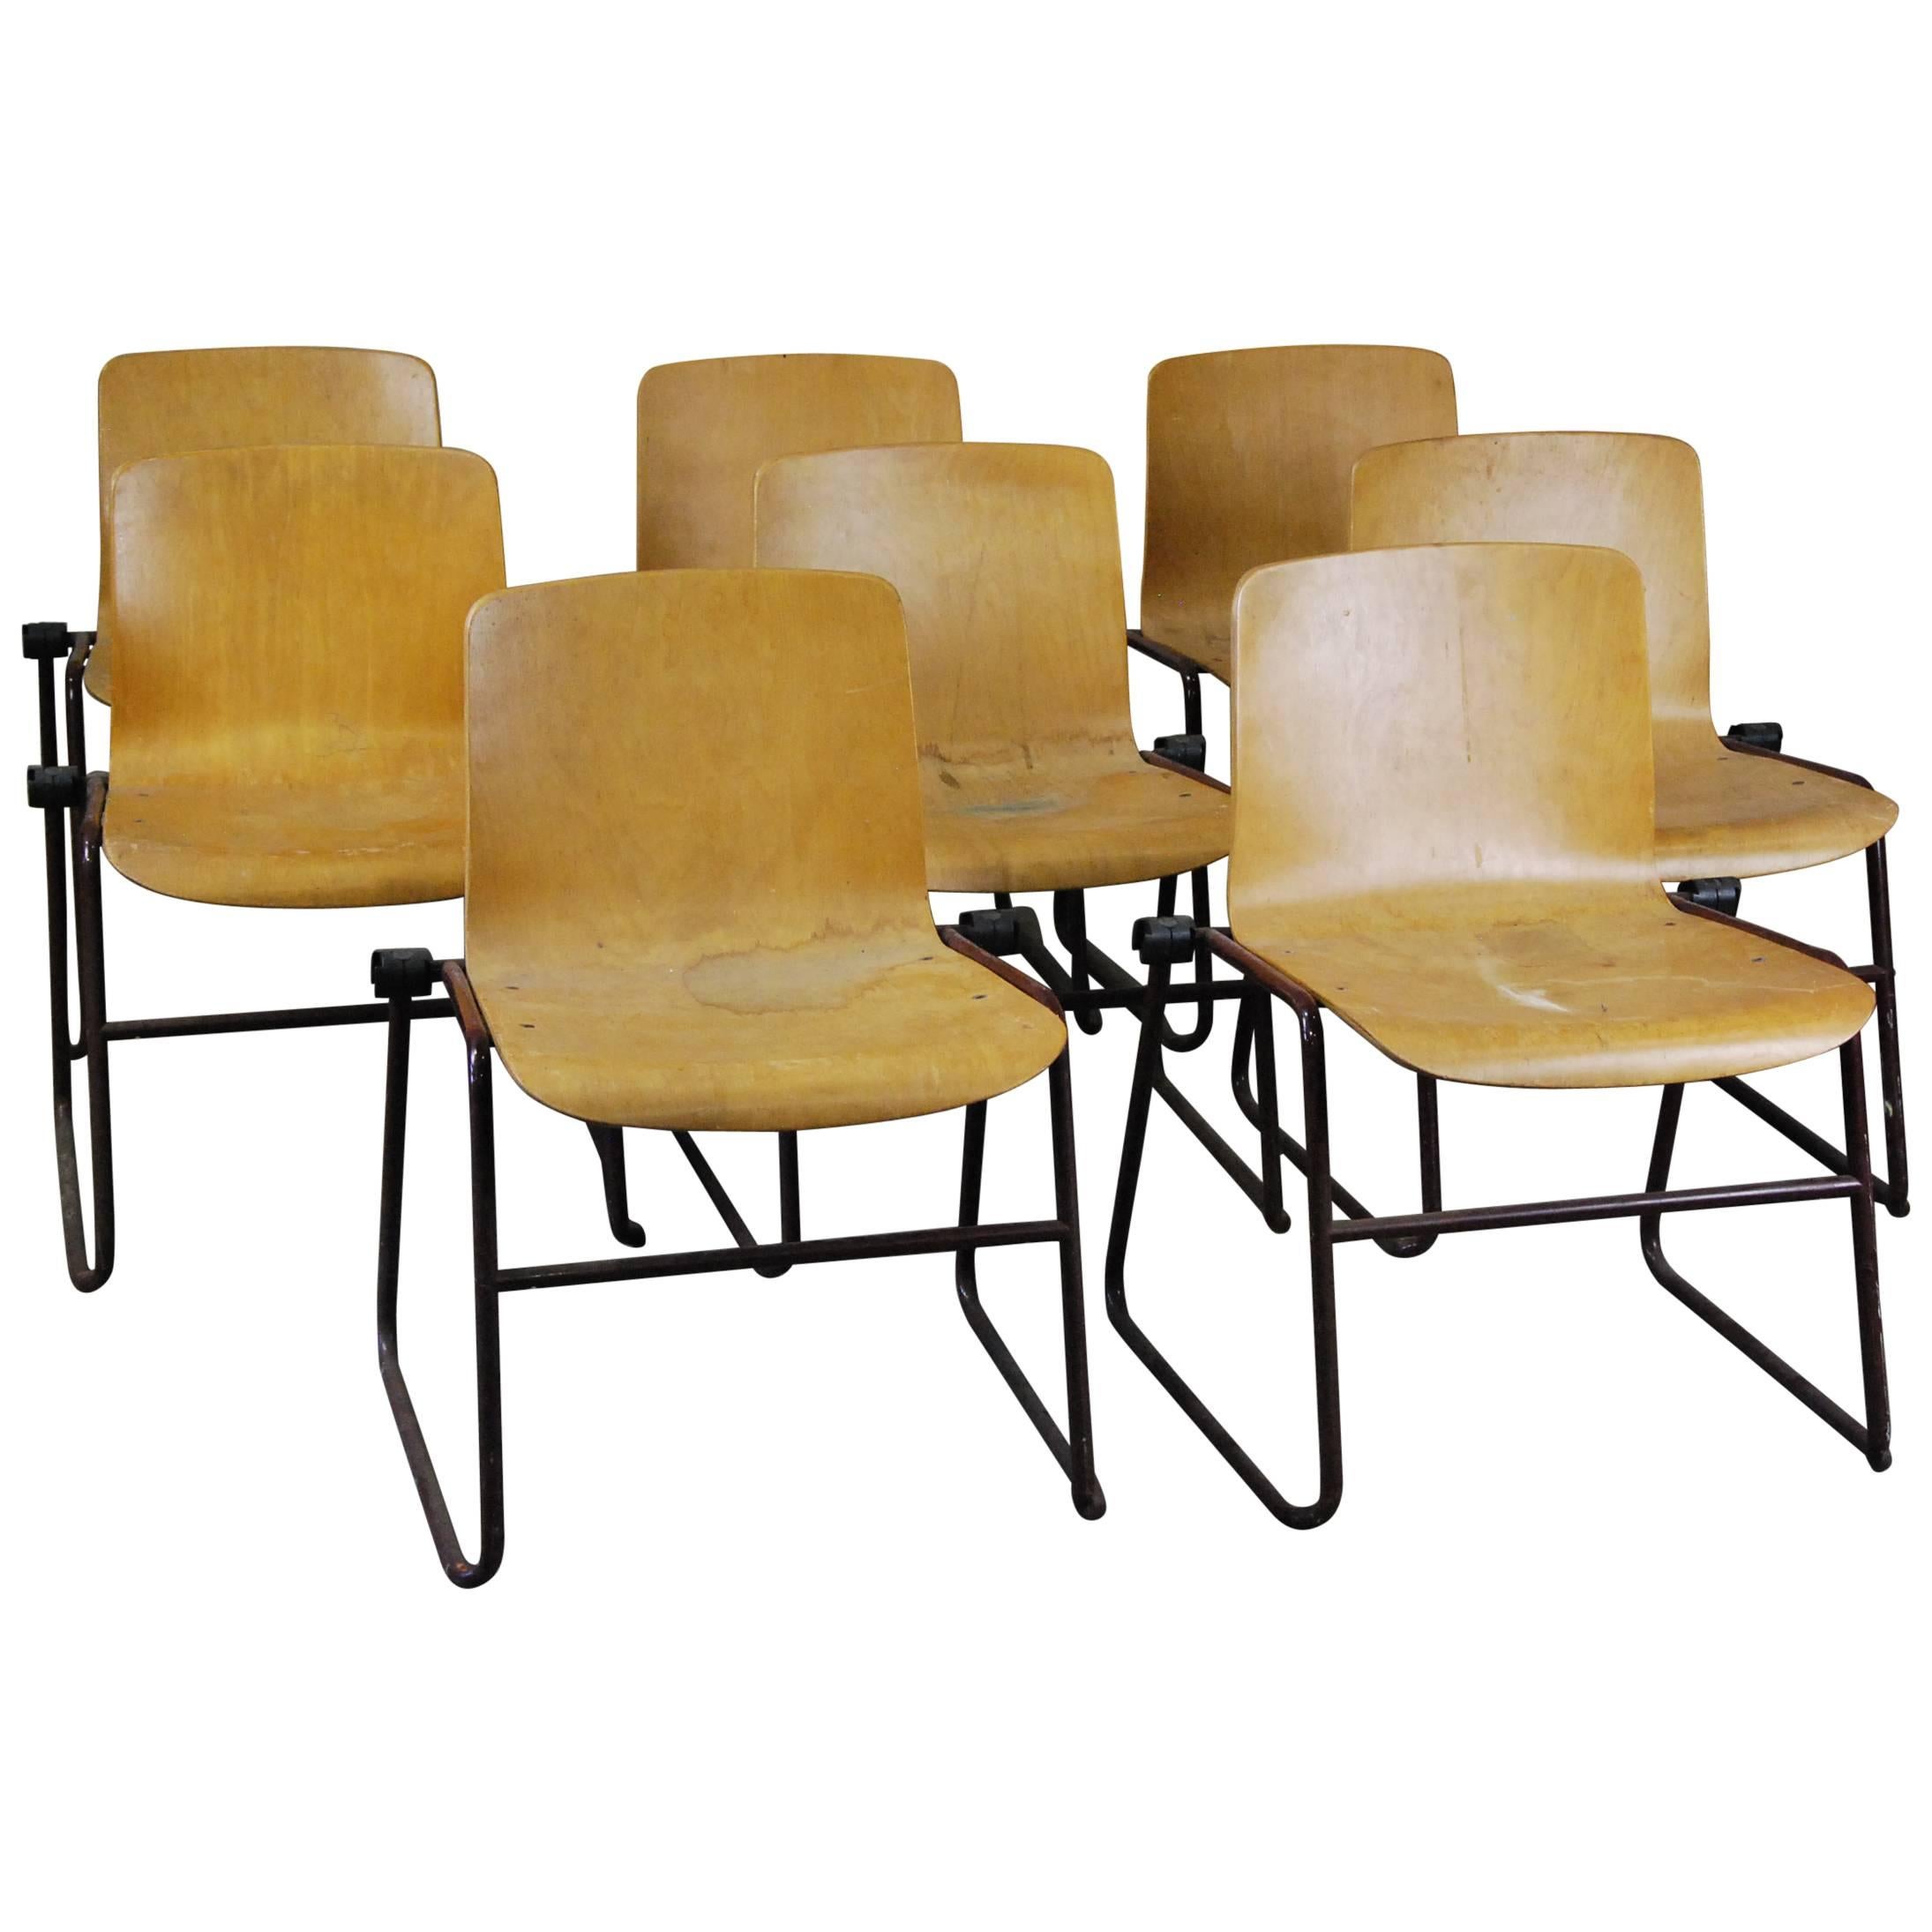 J Hayward Kinetics Modernist-Style Bent Plywood Chairs For Sale